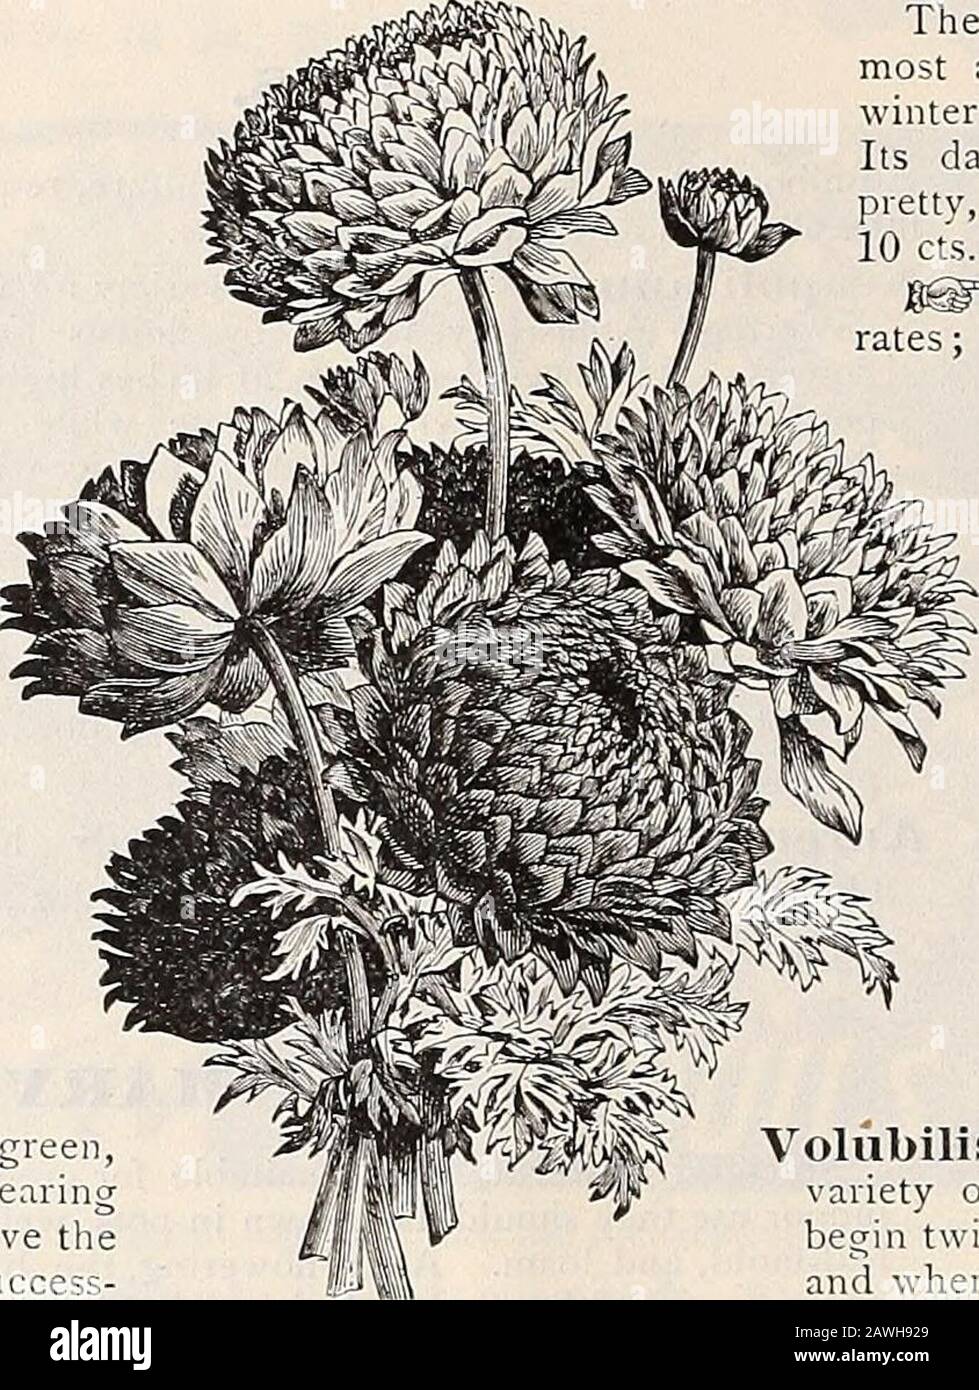 Dreer's autumn catalogue : 1899 bulbs plants, seeds, etc . Scarlet. Price any of the above, 3 for 12 els., 40cts. per doz., S3.00 per 100.Double Mixed. All colors. 3 for 8 cts., 25 per doz., ^1.50 per lOO. SINGLE ANEMONES. Sing-le Brilliant Scarlet. Single White Single Mixed ANEMONE ANOMATHECACRUENTA. A pretty little bulbous plant from SouthAfrica, which is quite hardy with slightprotection, but does best wdien grown inframes or a cool greenhouse. Grows 8 to12 inches high, producing in quantitypretty flowers ^- inch across of a dazzlingrosy carmine color, with a dark crimsonspot on the three l Stock Photo